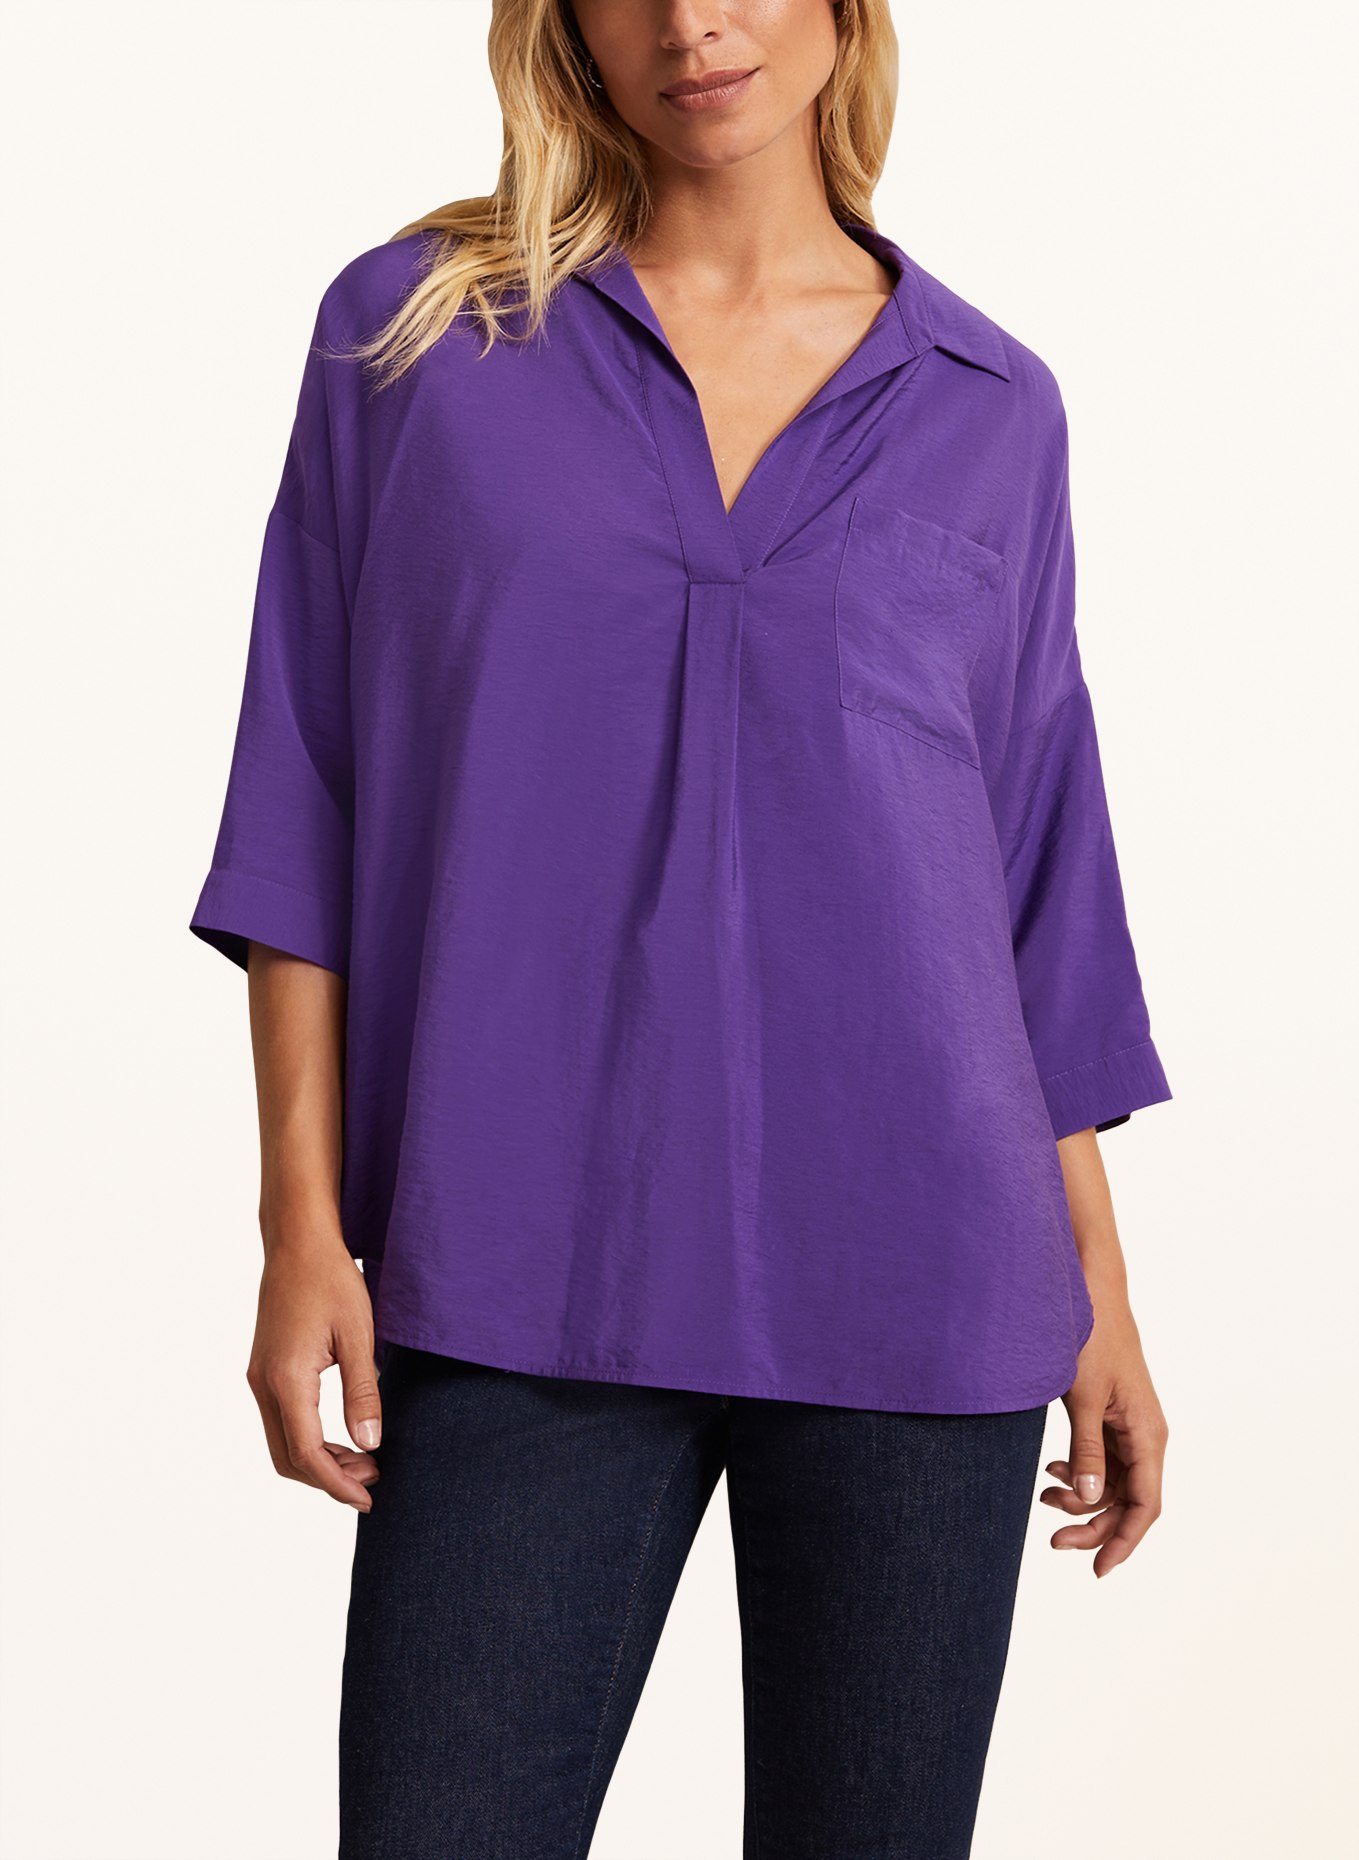 Phase Eight Shirt blouse CYNTHIA with 3/4 sleeves, Color: PURPLE (Image 4)